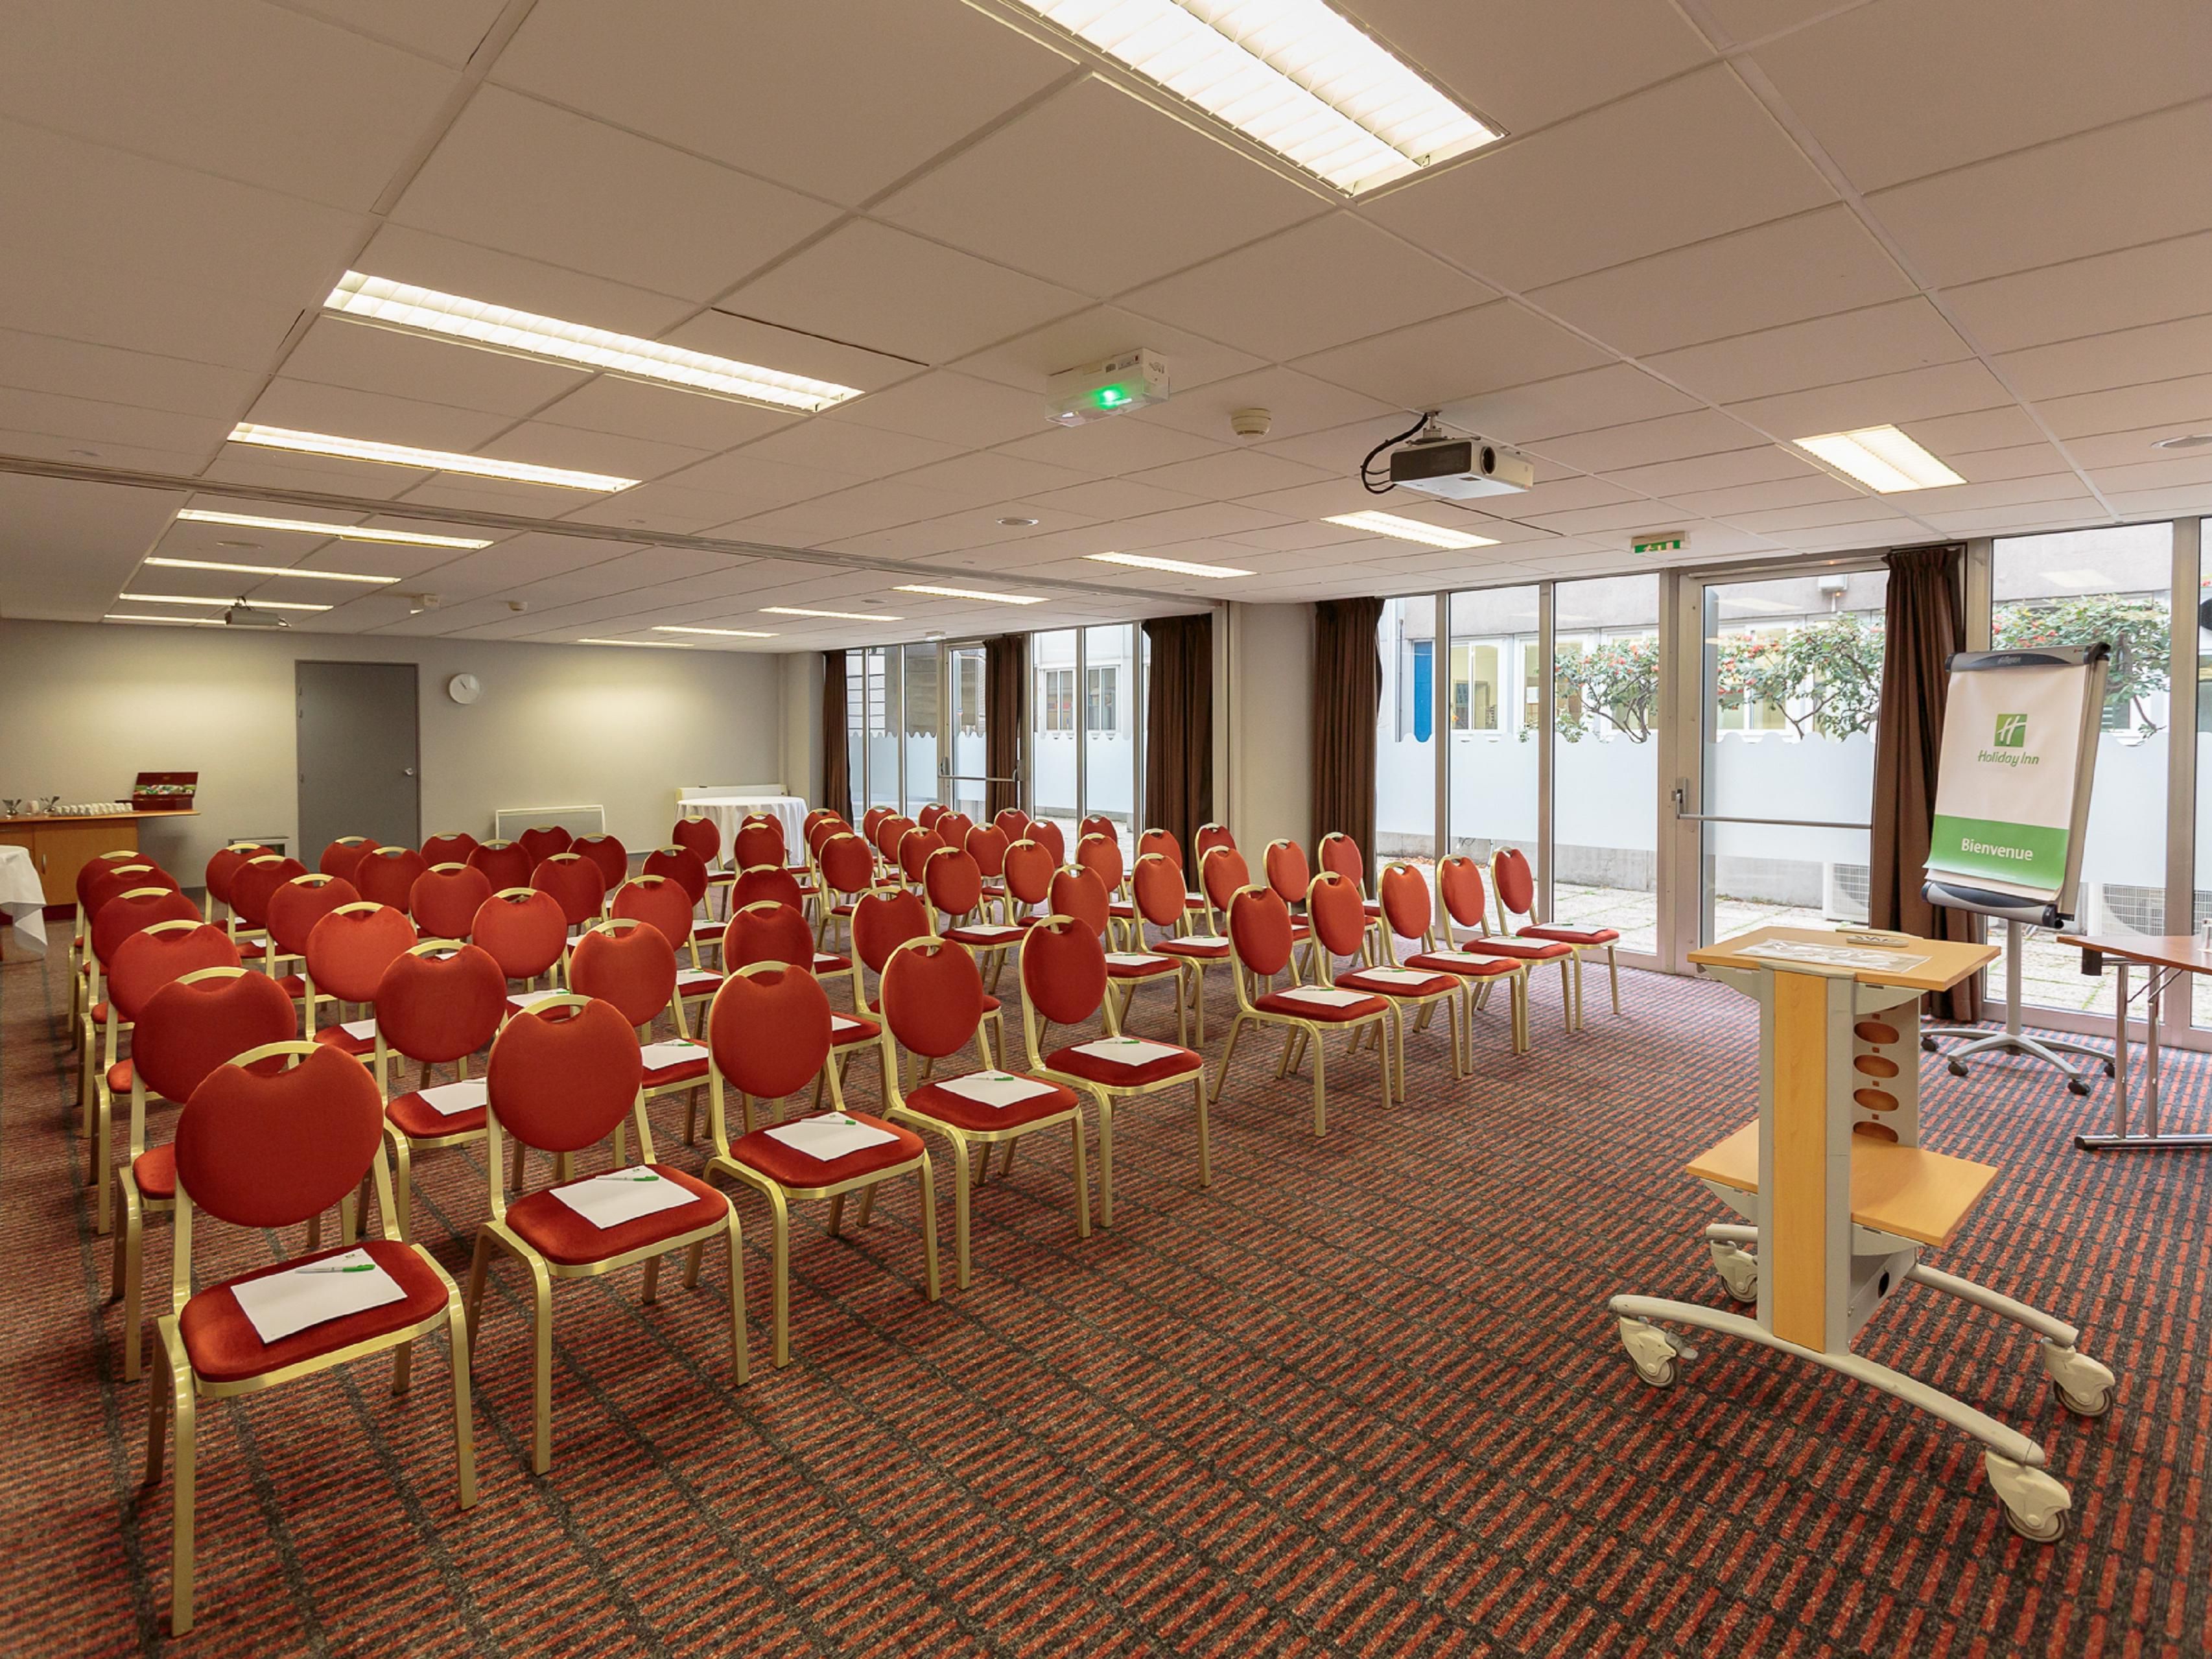 With 190 square metres of flexible meeting space, we can host any type of board meeting, social function or seminar with personalised attention. Catering from our restaurant, Le Gergovia, is a tasty bonus.